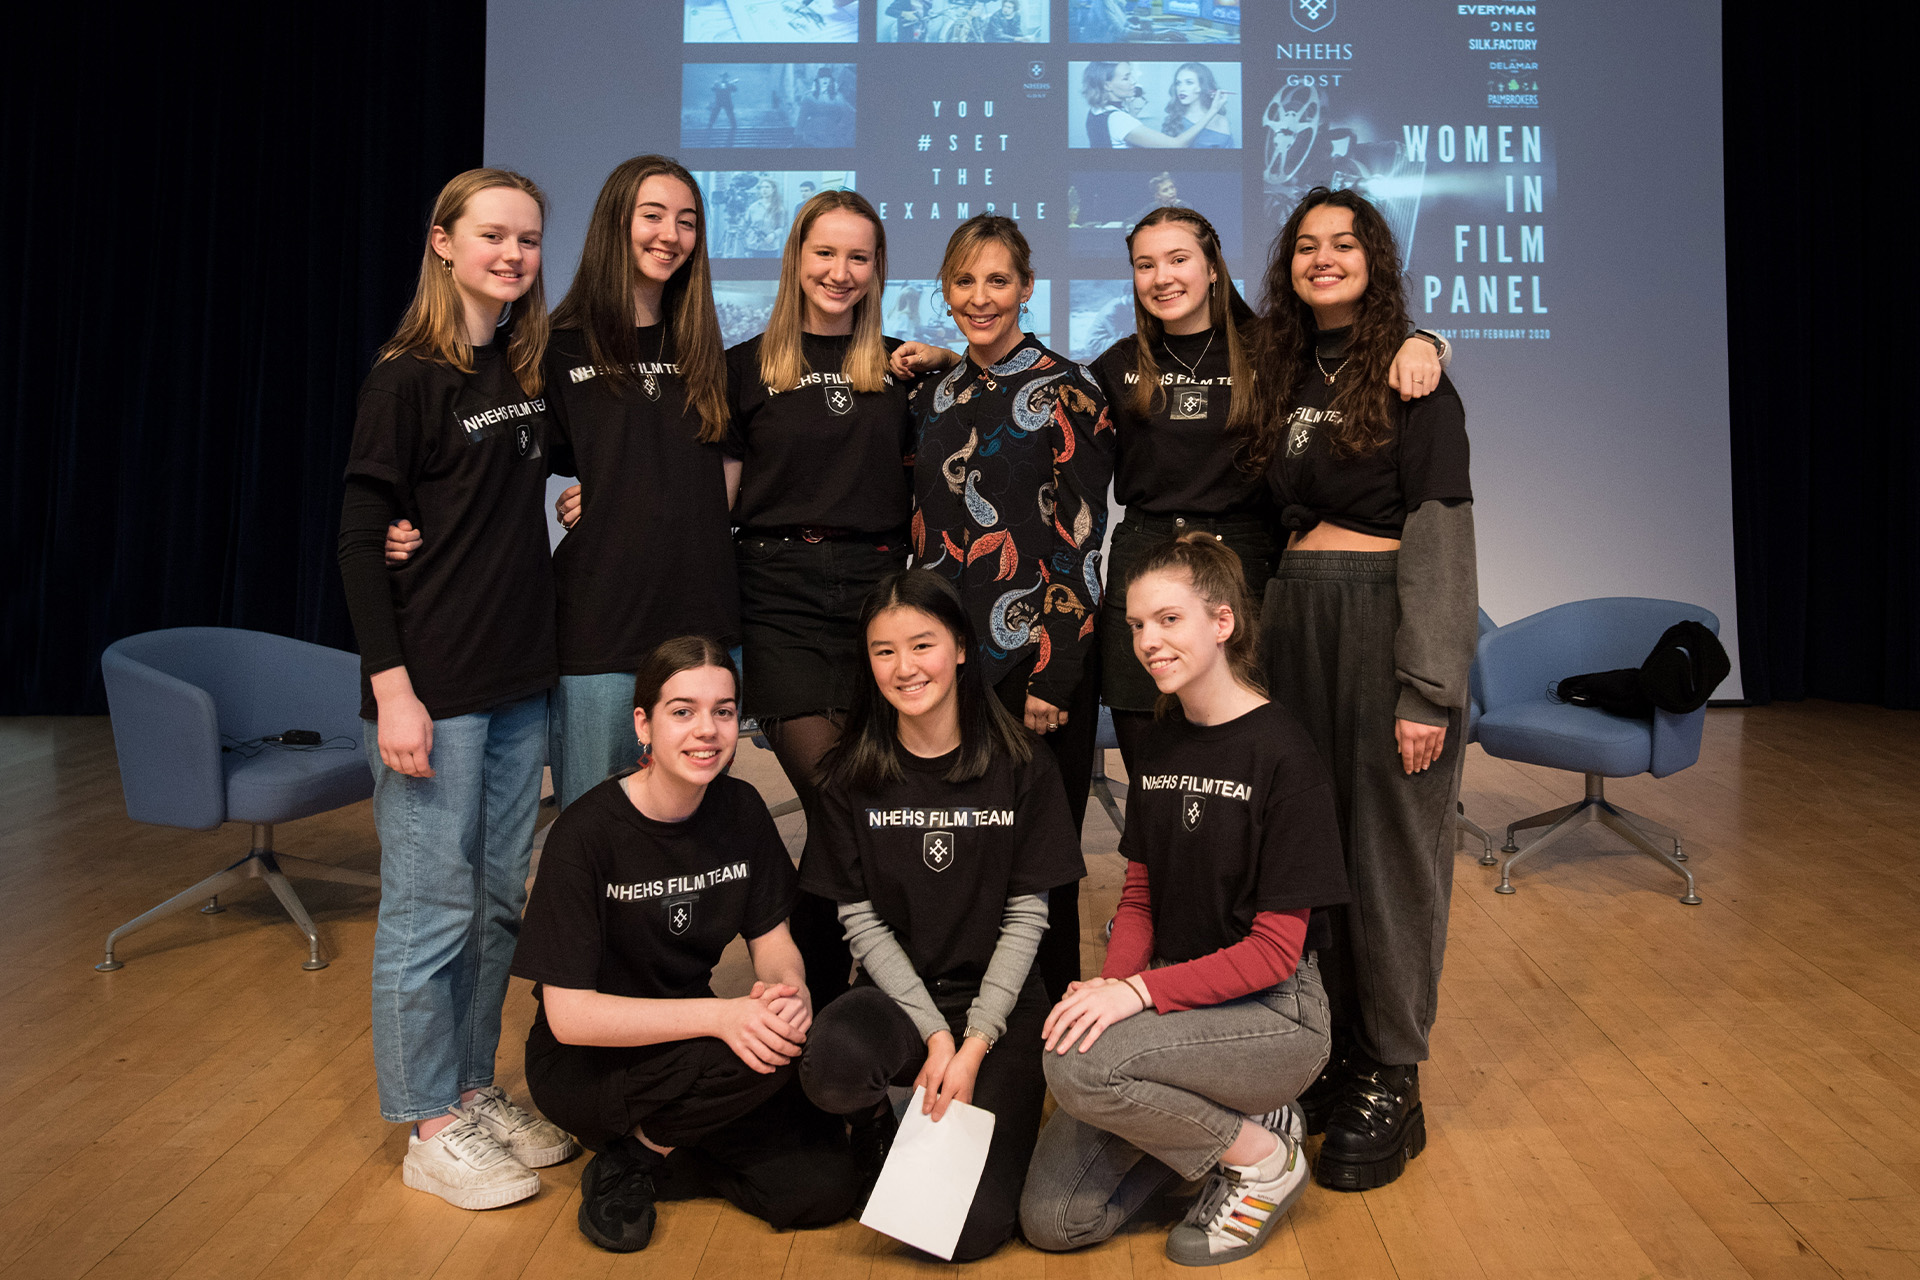 Notting Hill & Ealing High School pupils at the Film Festival Celebrity Panel